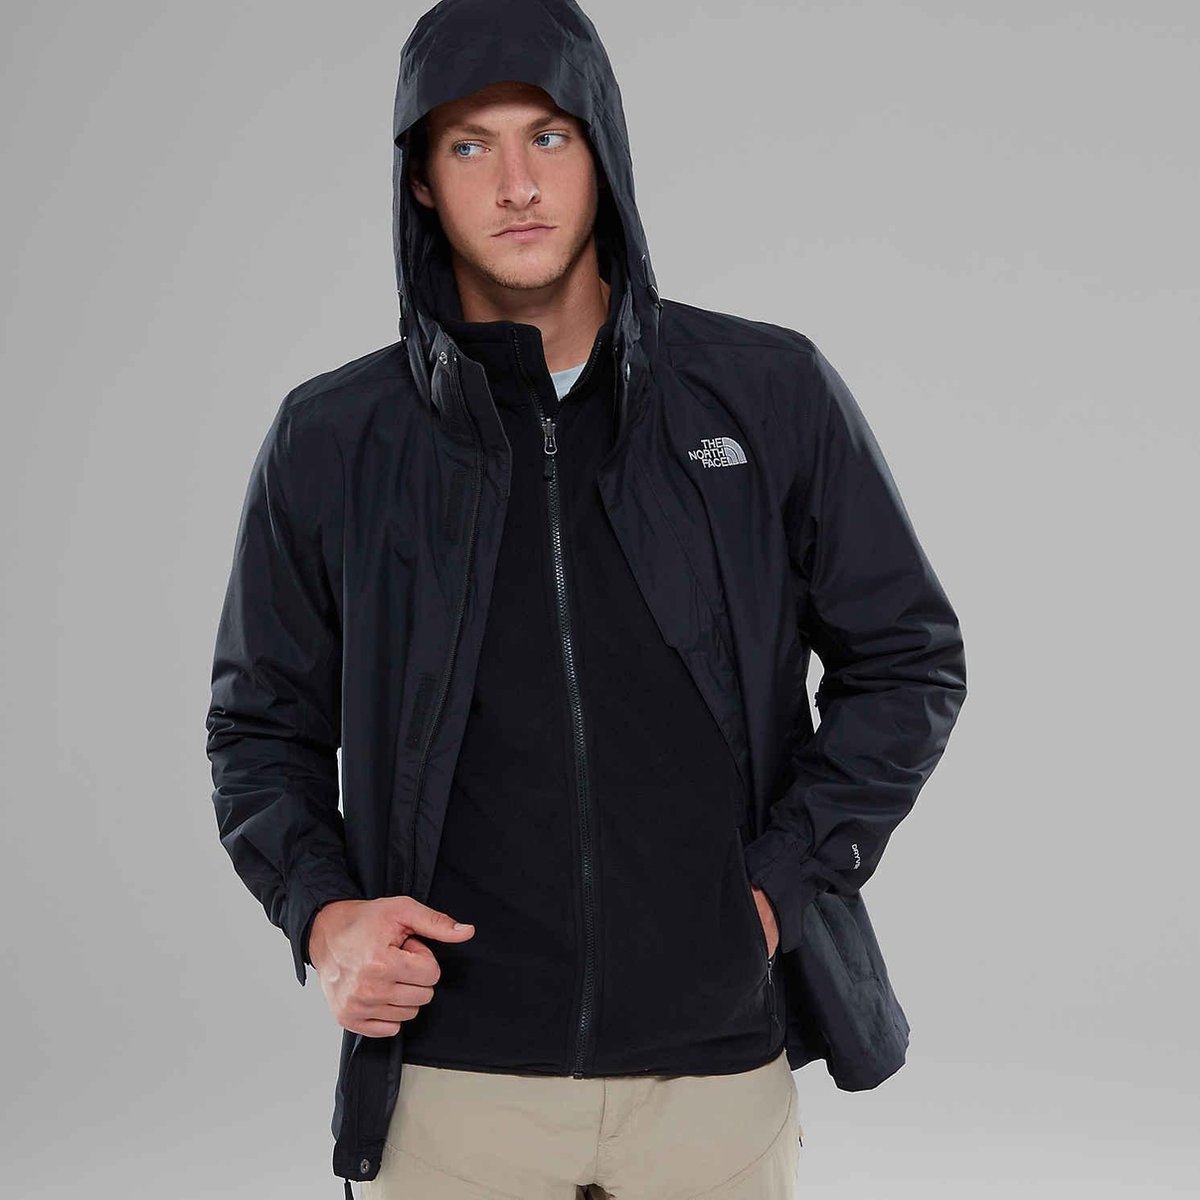 THE NORTH FACE EVOLUTION II TRICLIMATE JACKET M - TNF BLACK-D M | bol.com